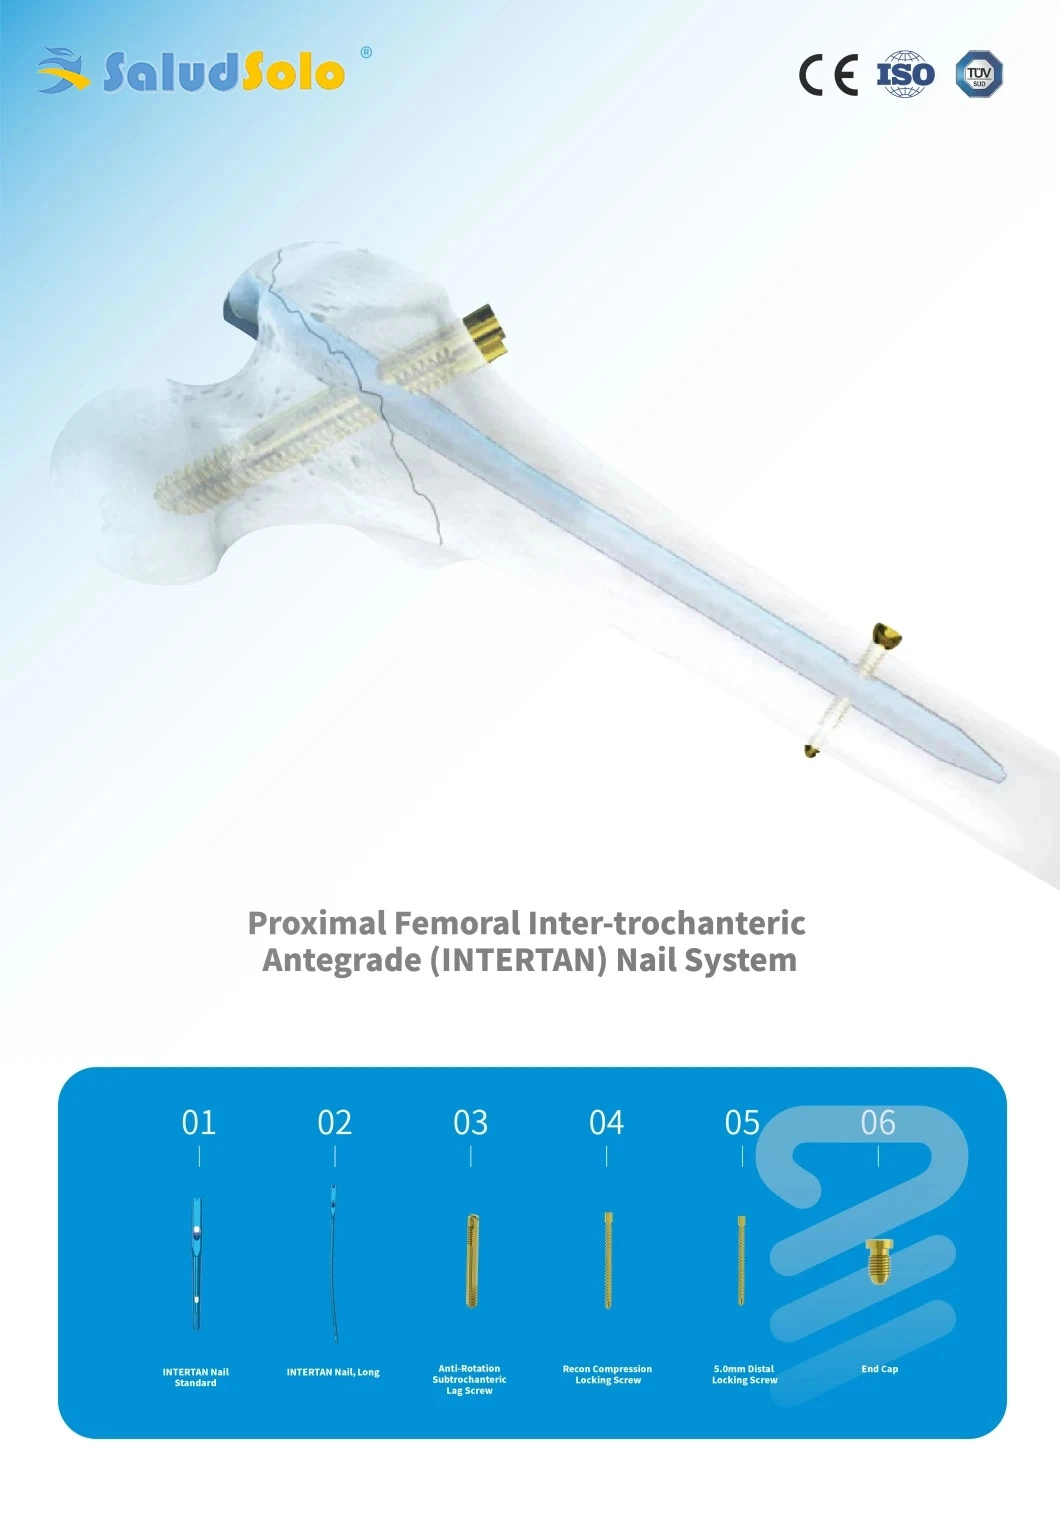 Orthopedic Surgical Implant for Trauma Surgery, Standard Proximal Femoral Intertrochanteric Antegrade Nails, Intertan Intramedullary Nail System